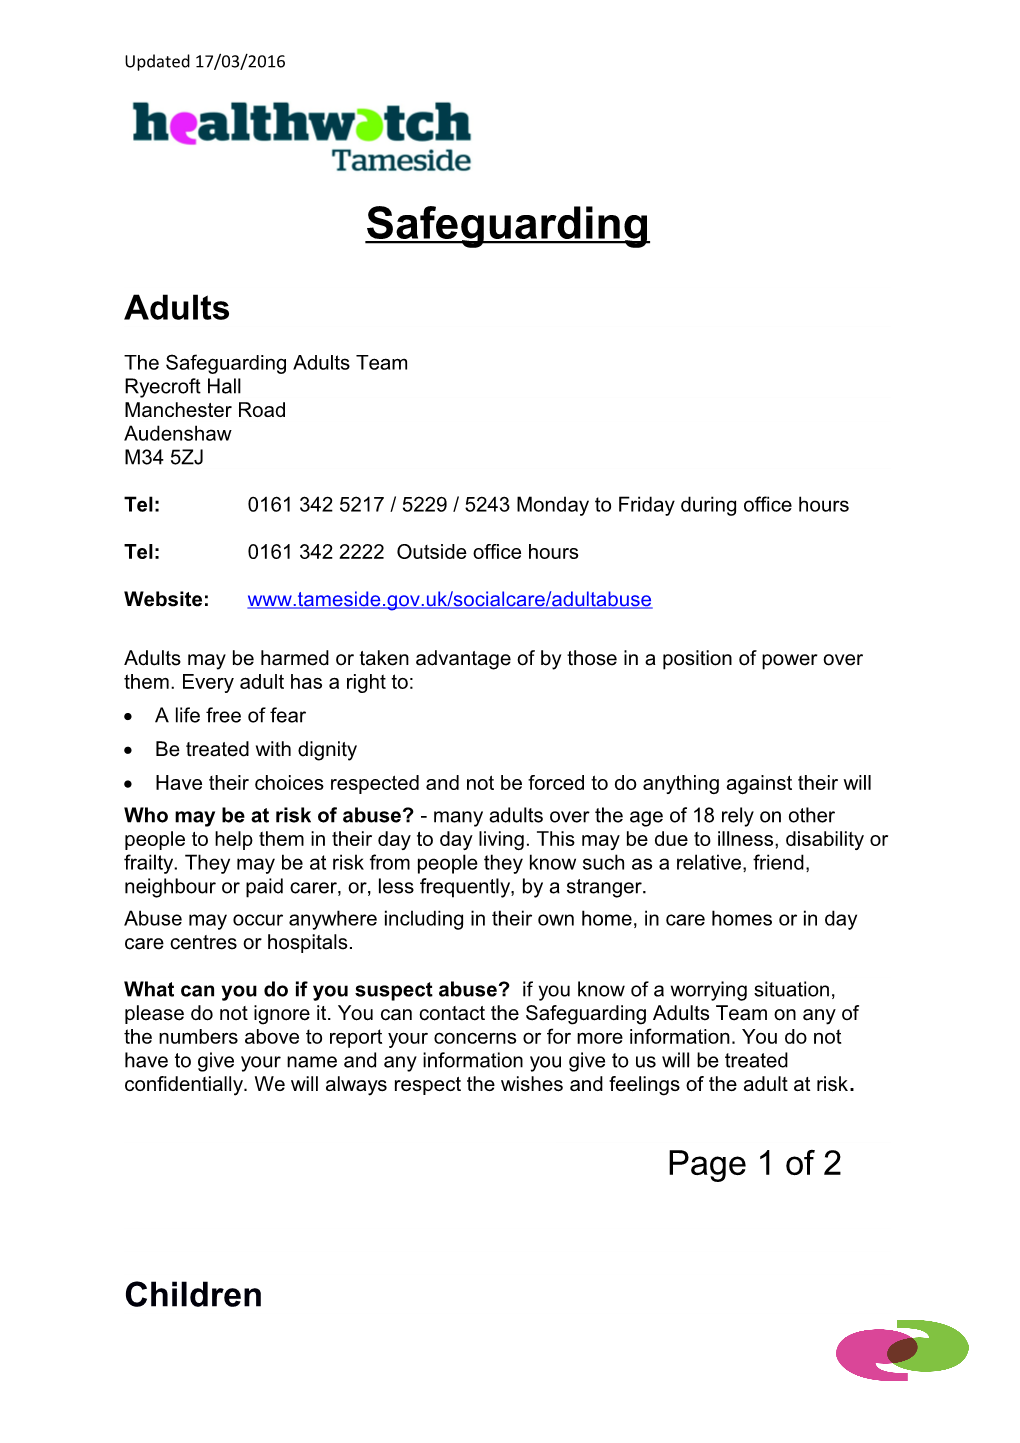 The Safeguarding Adults Team